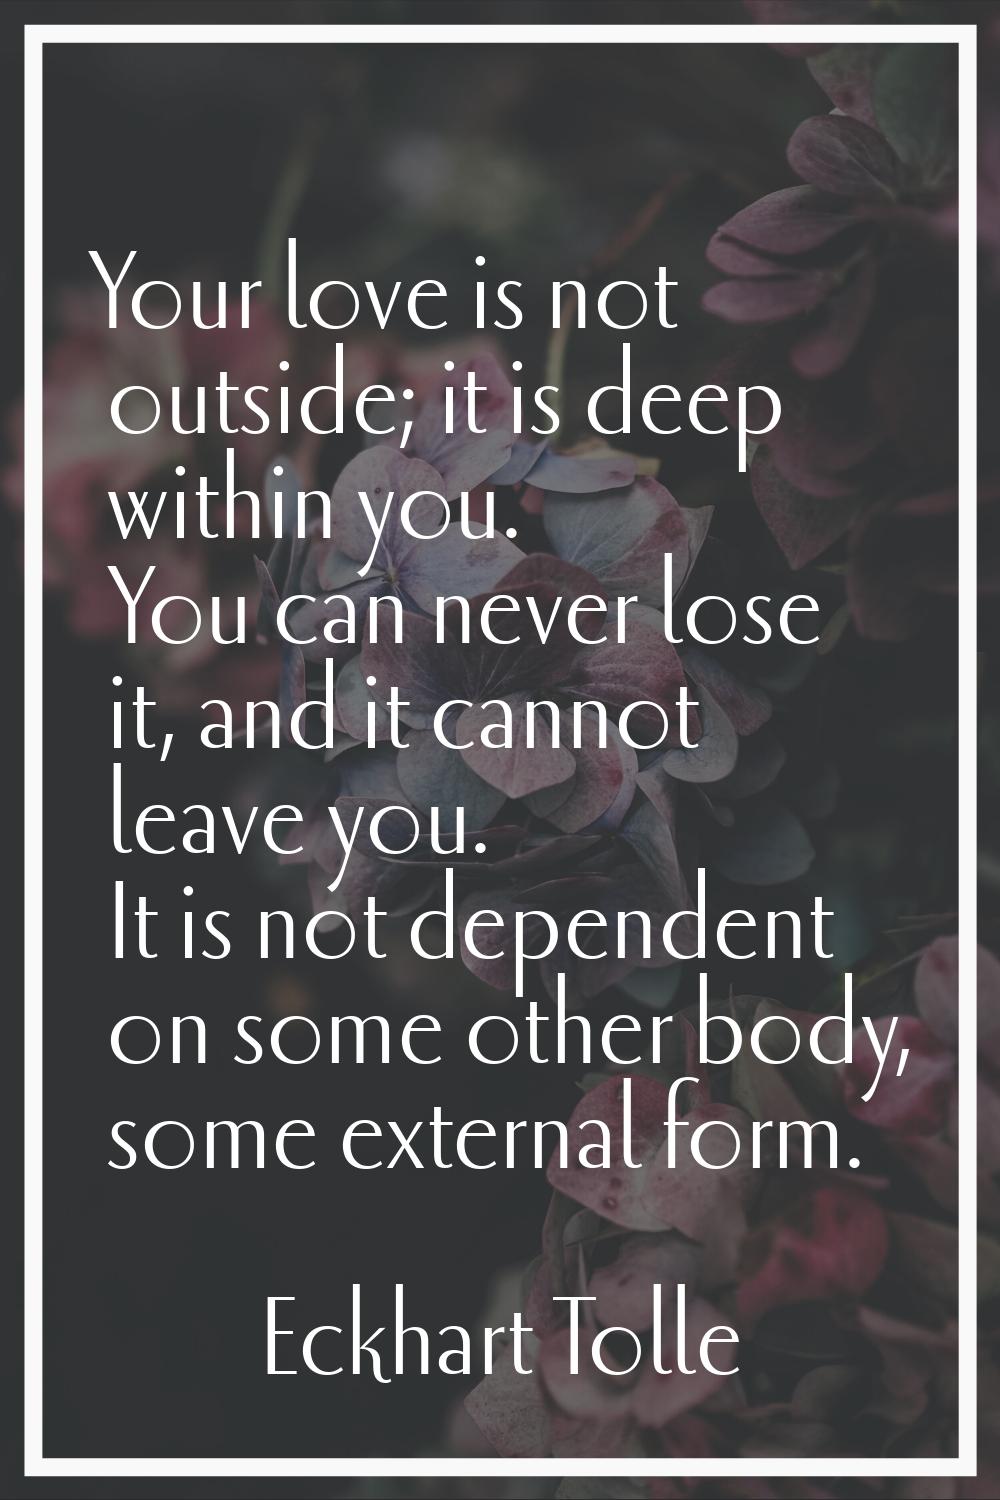 Your love is not outside; it is deep within you. You can never lose it, and it cannot leave you. It